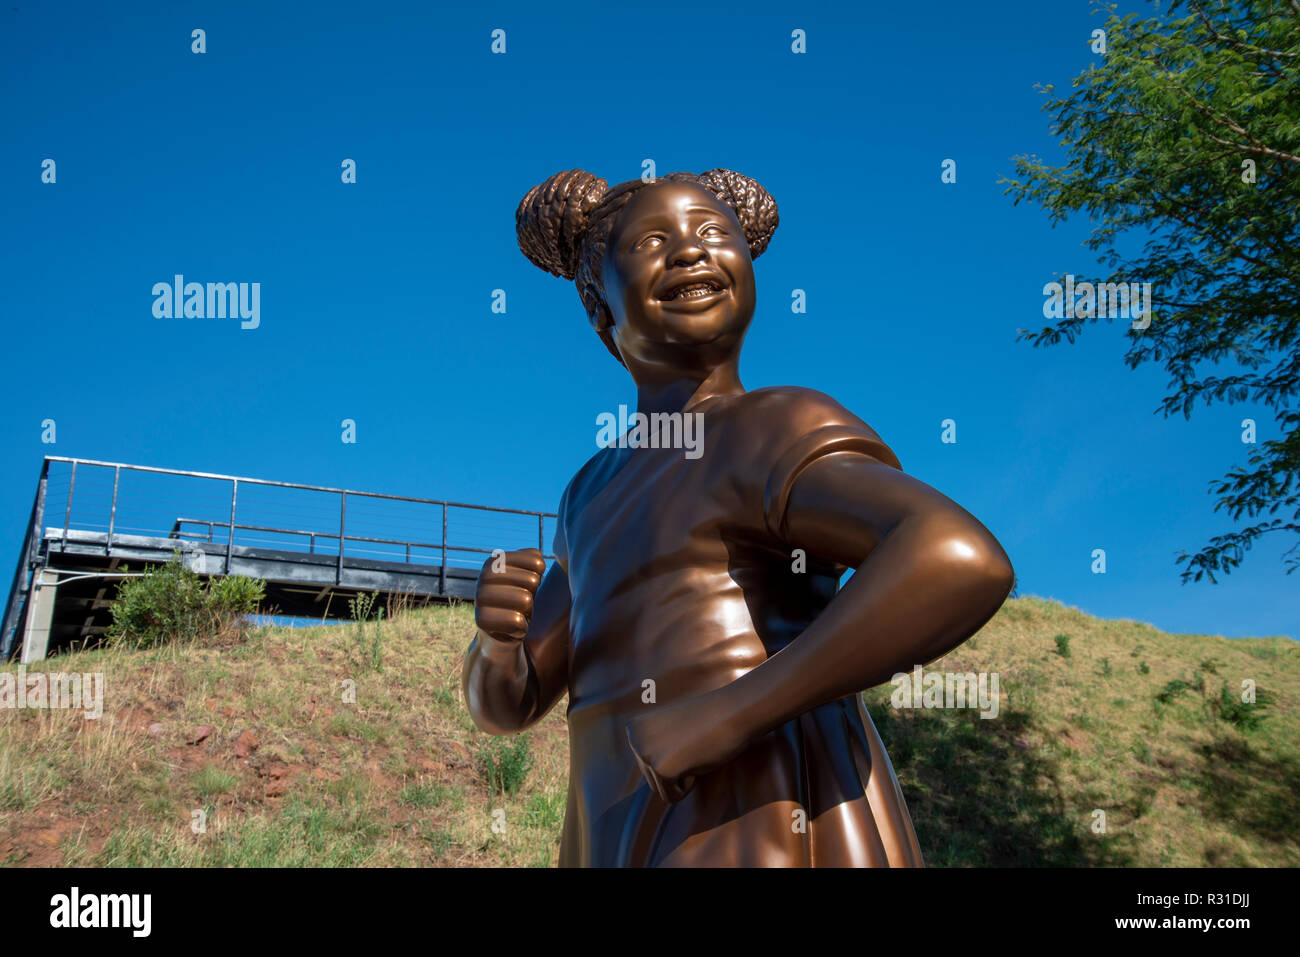 Johannesburg, South Africa, 21 November, 2018. New statue Hope, which was unveiled late last night at a UNICEF function celebrating World Children's Day. The girl figure symbolically acknowledges the presence of children at the Women's Jail prison complex, where they were often imprisoned together with their mothers during Apartheid, according to the Constitution Hill museum site. The Constitutional Court is situated on Constitution Hill, where the Apartheid government in the past held prisoners, including Nelson Mandela. Credit: Eva-Lotta Jansson/Alamy Live News Stock Photo